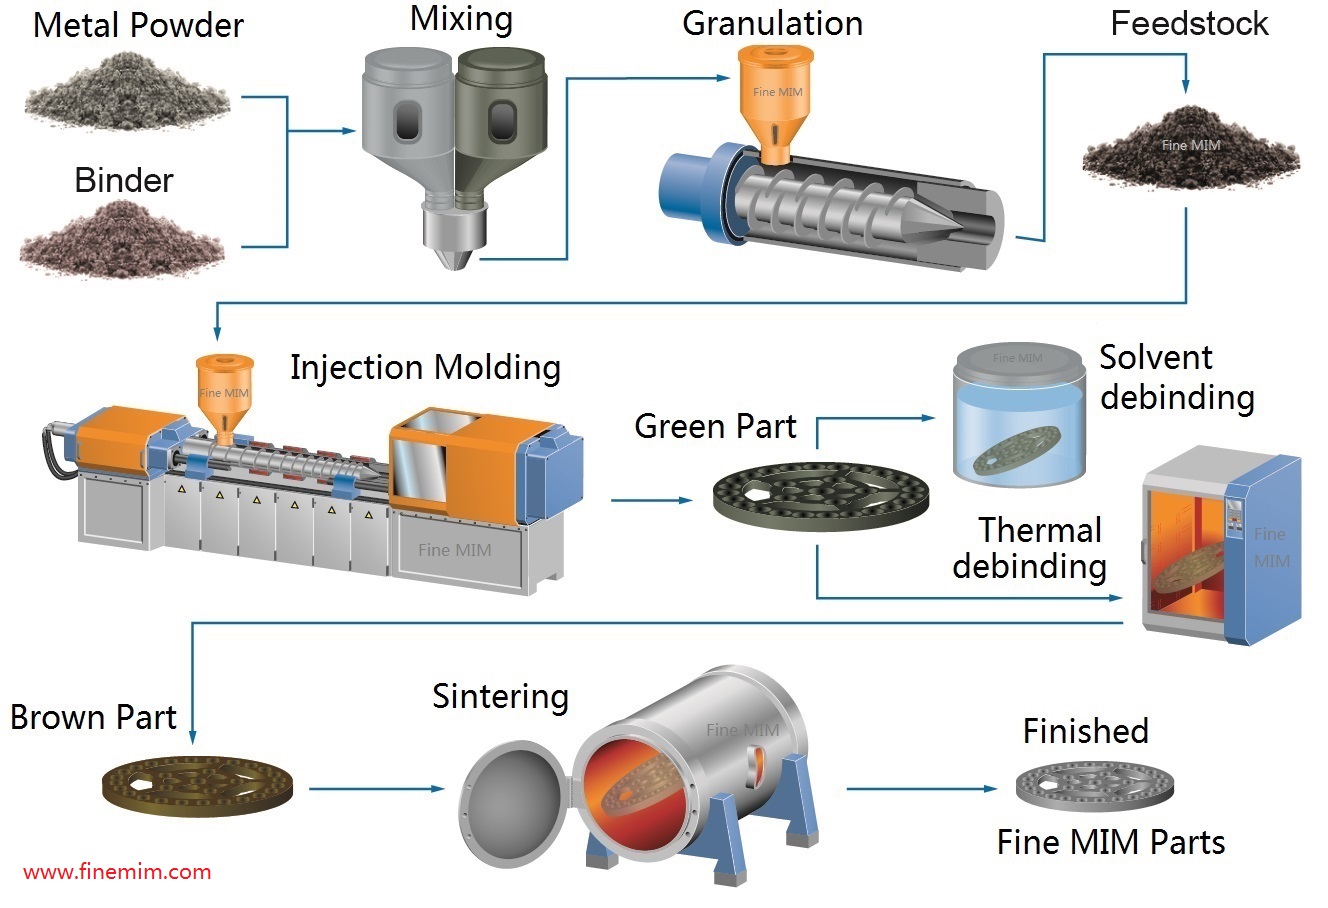 Metal Injection Molding Process